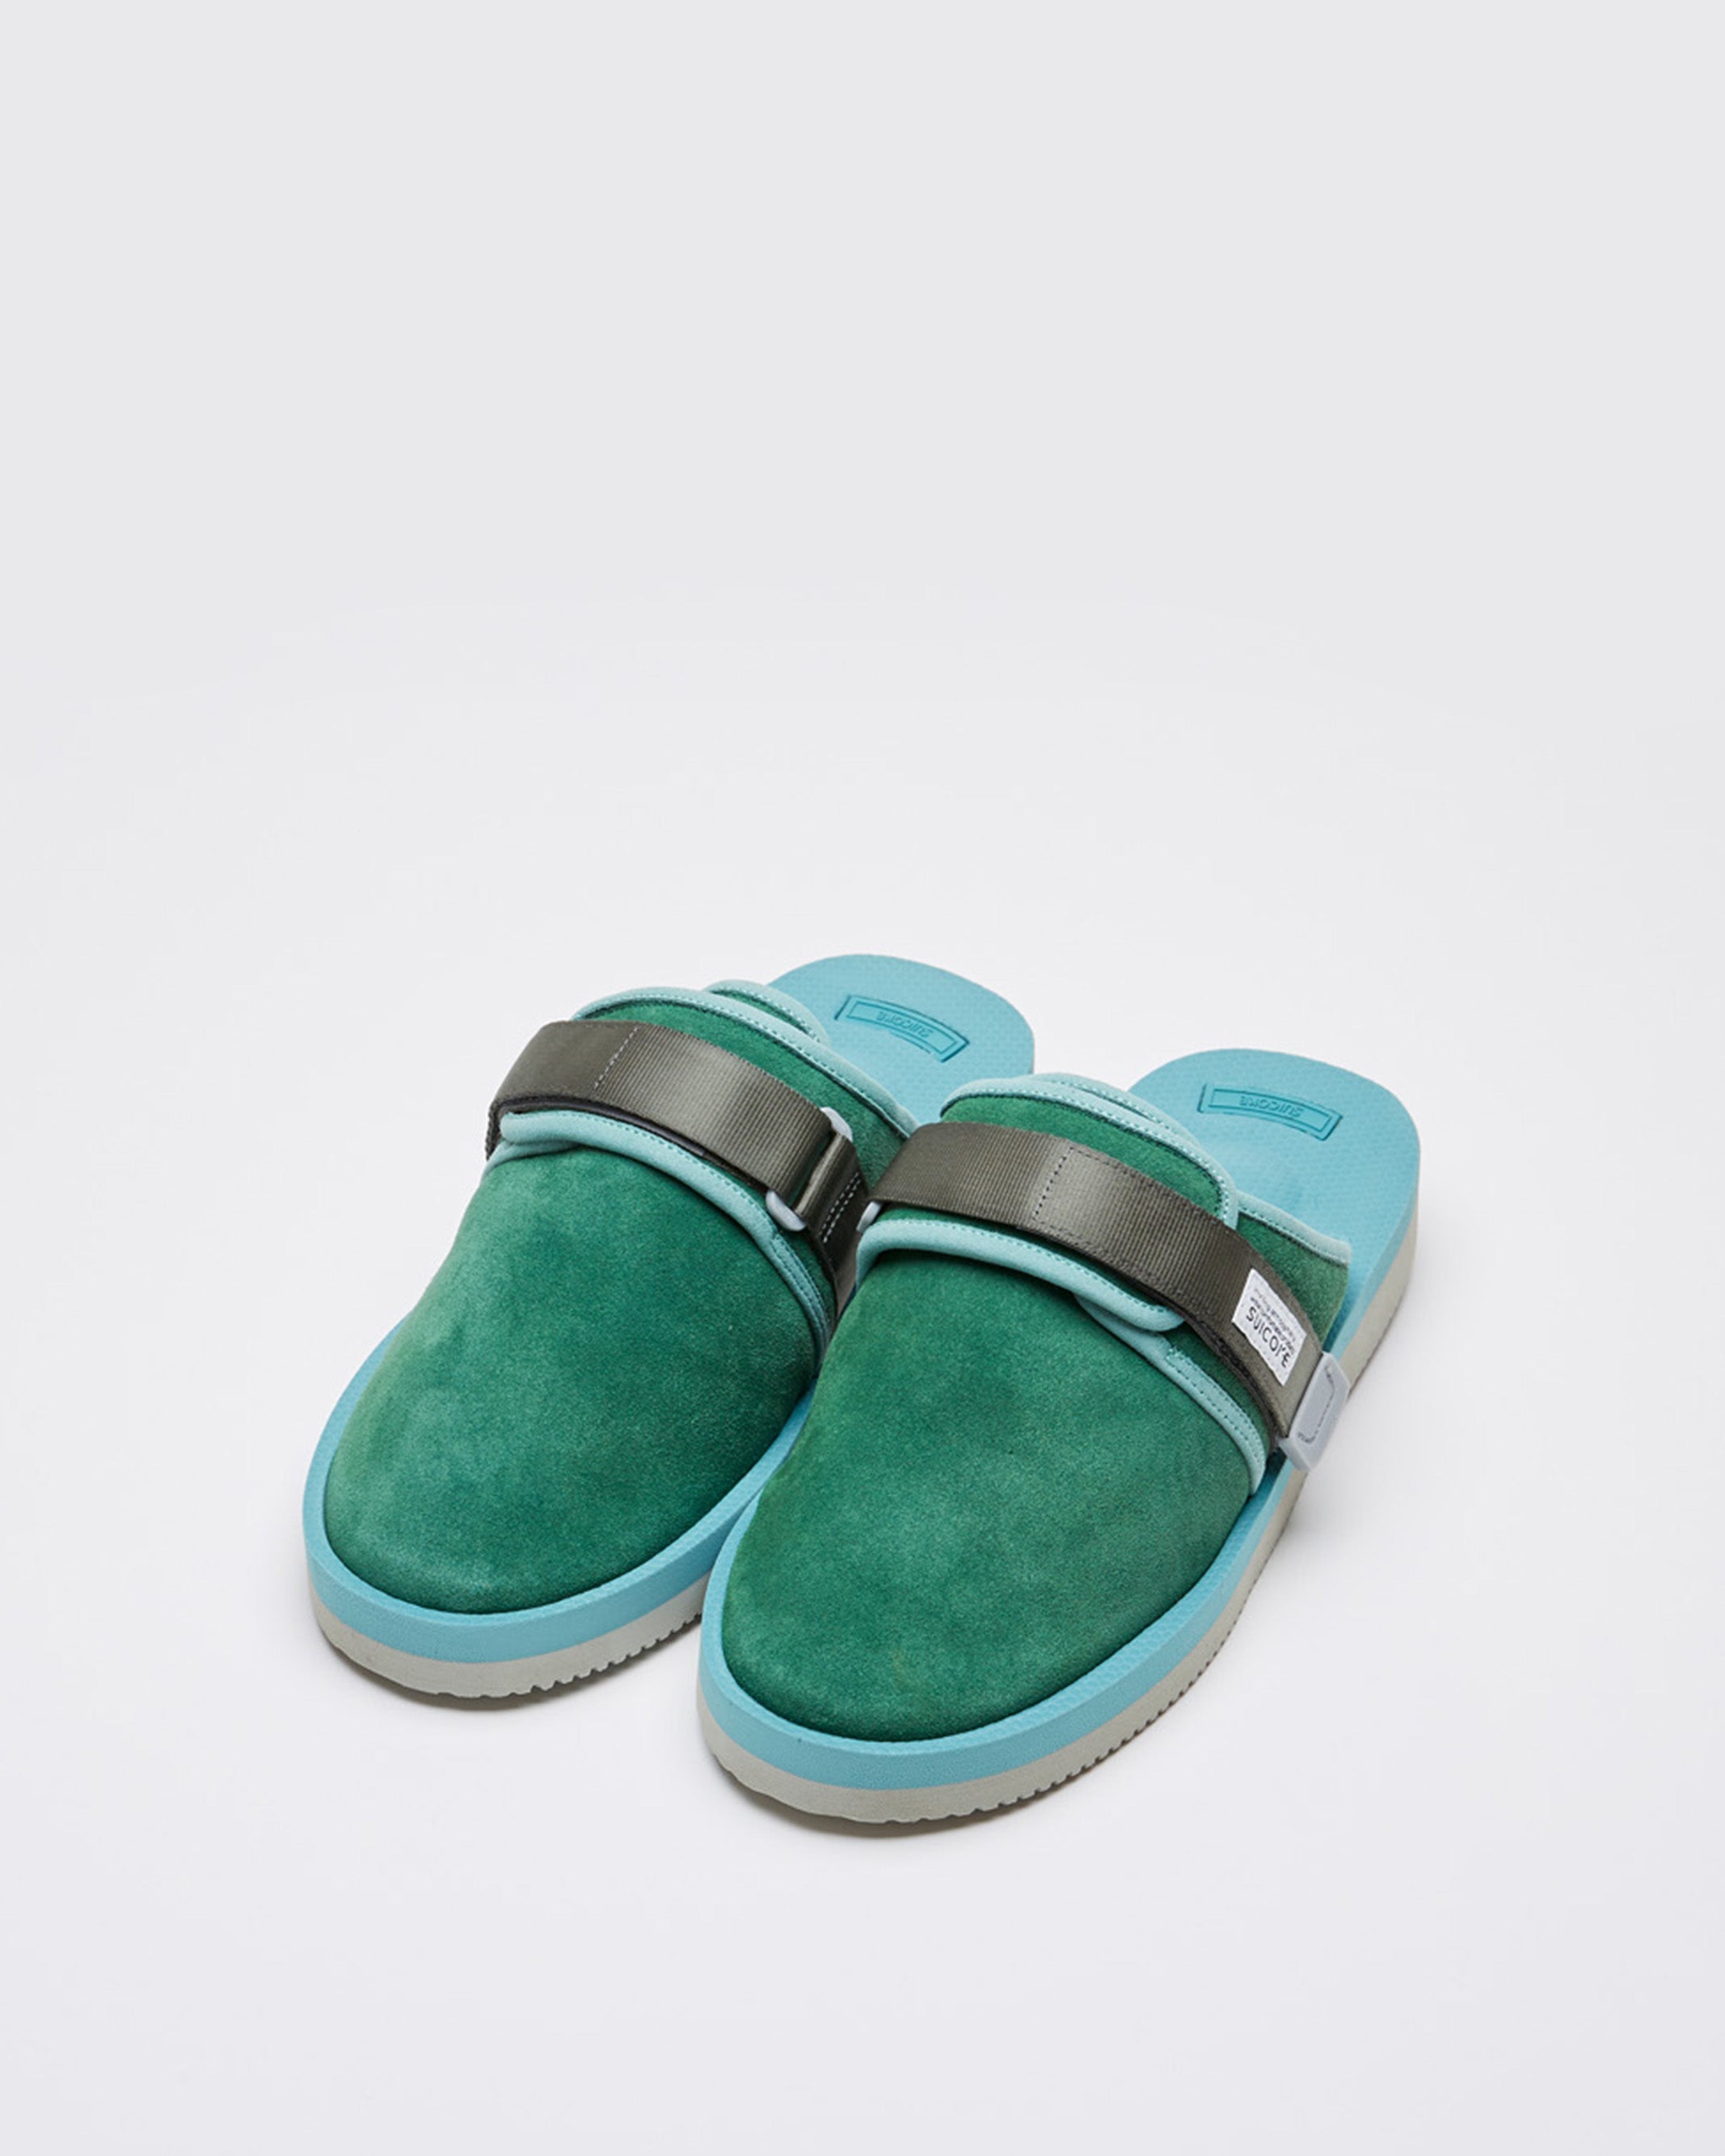 SUICOKE ZAVO-VS in Sage x Teal OG-072VS | Shop from eightywingold an official brand partner for SUICOKE Canada and US.